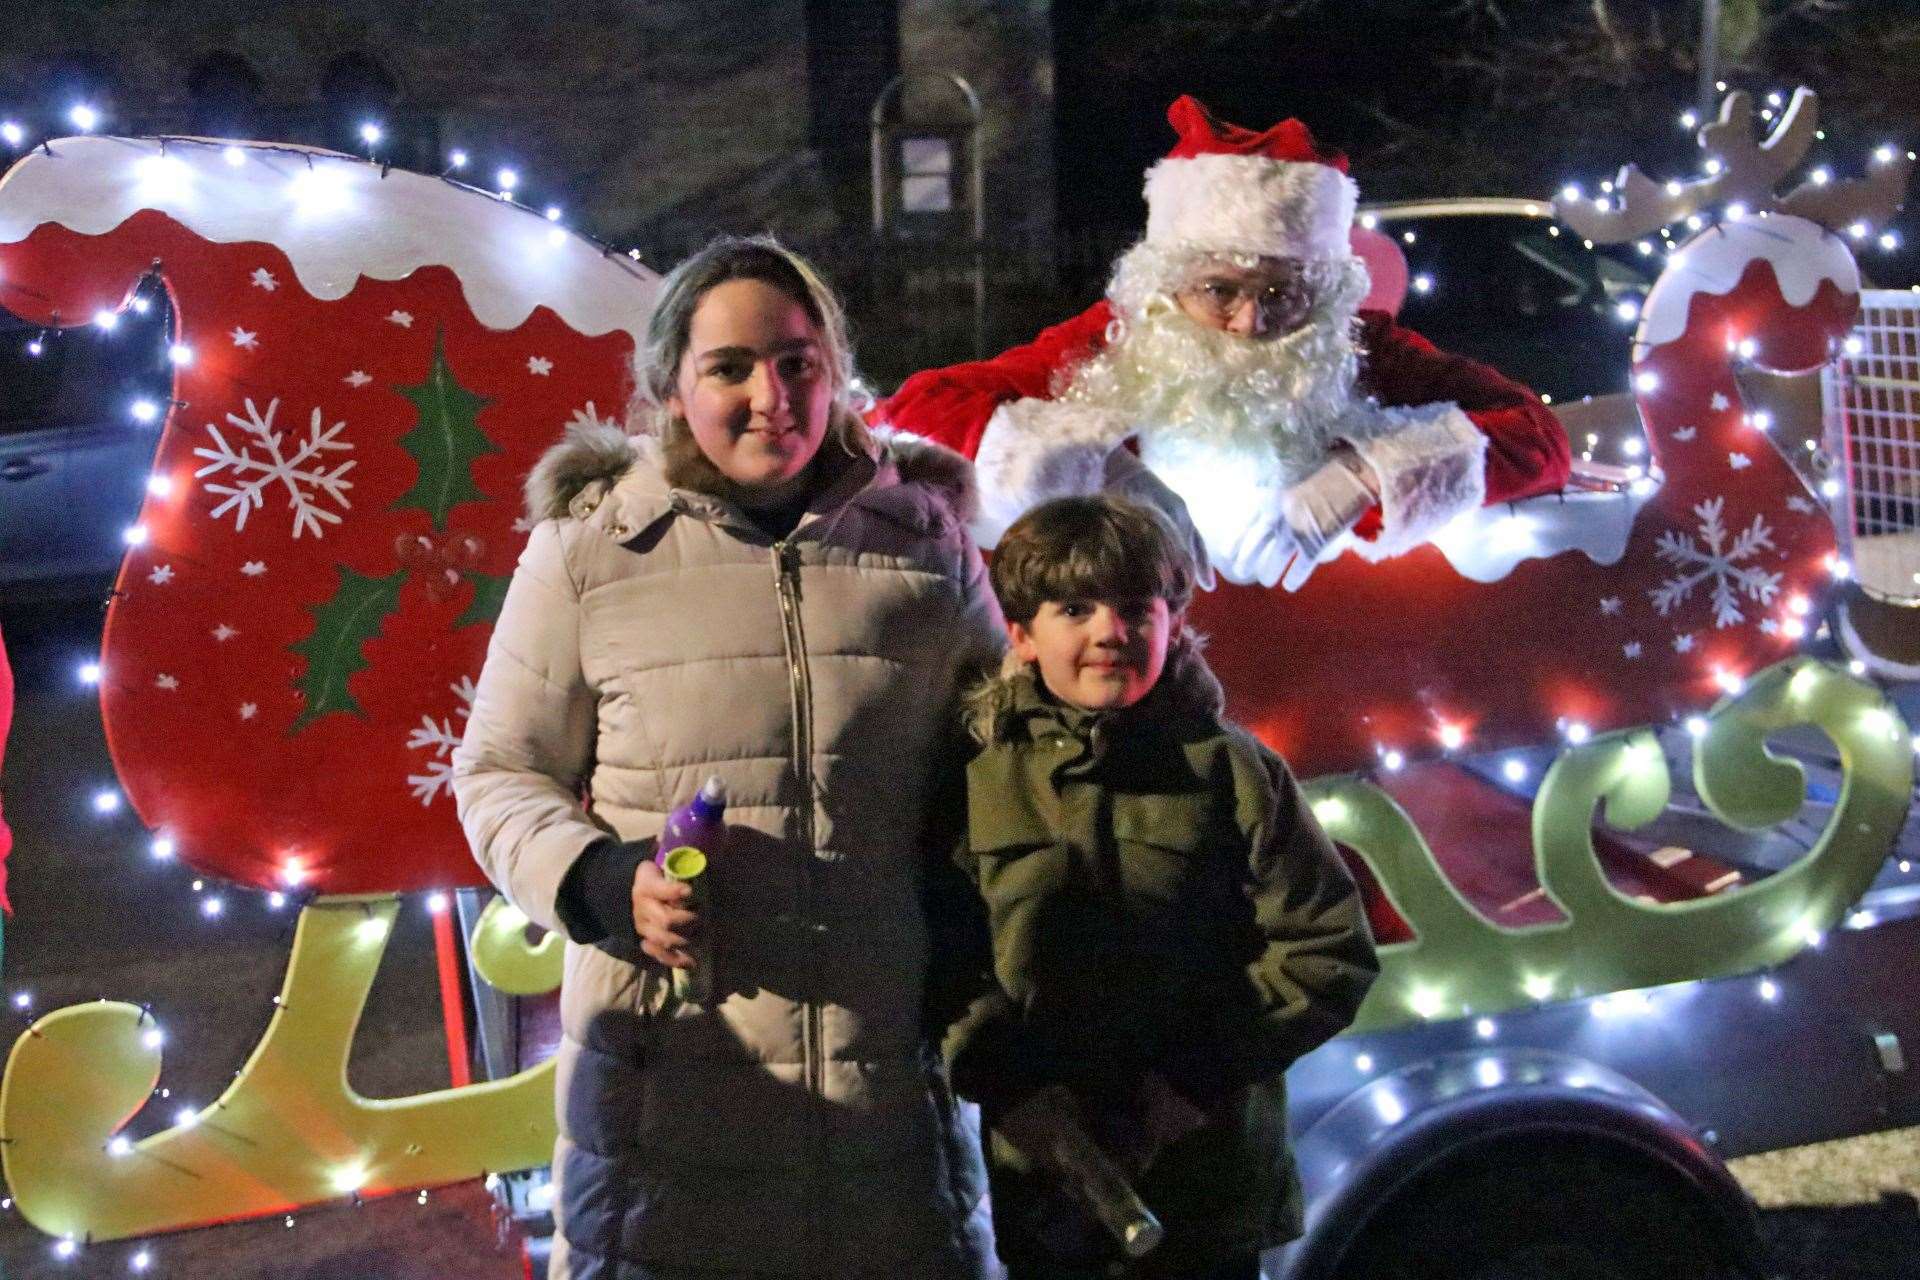 Grace and Adam Nicholls from Halkirk after receiving sweets from Santa. Picture: Ruthie Nicholls